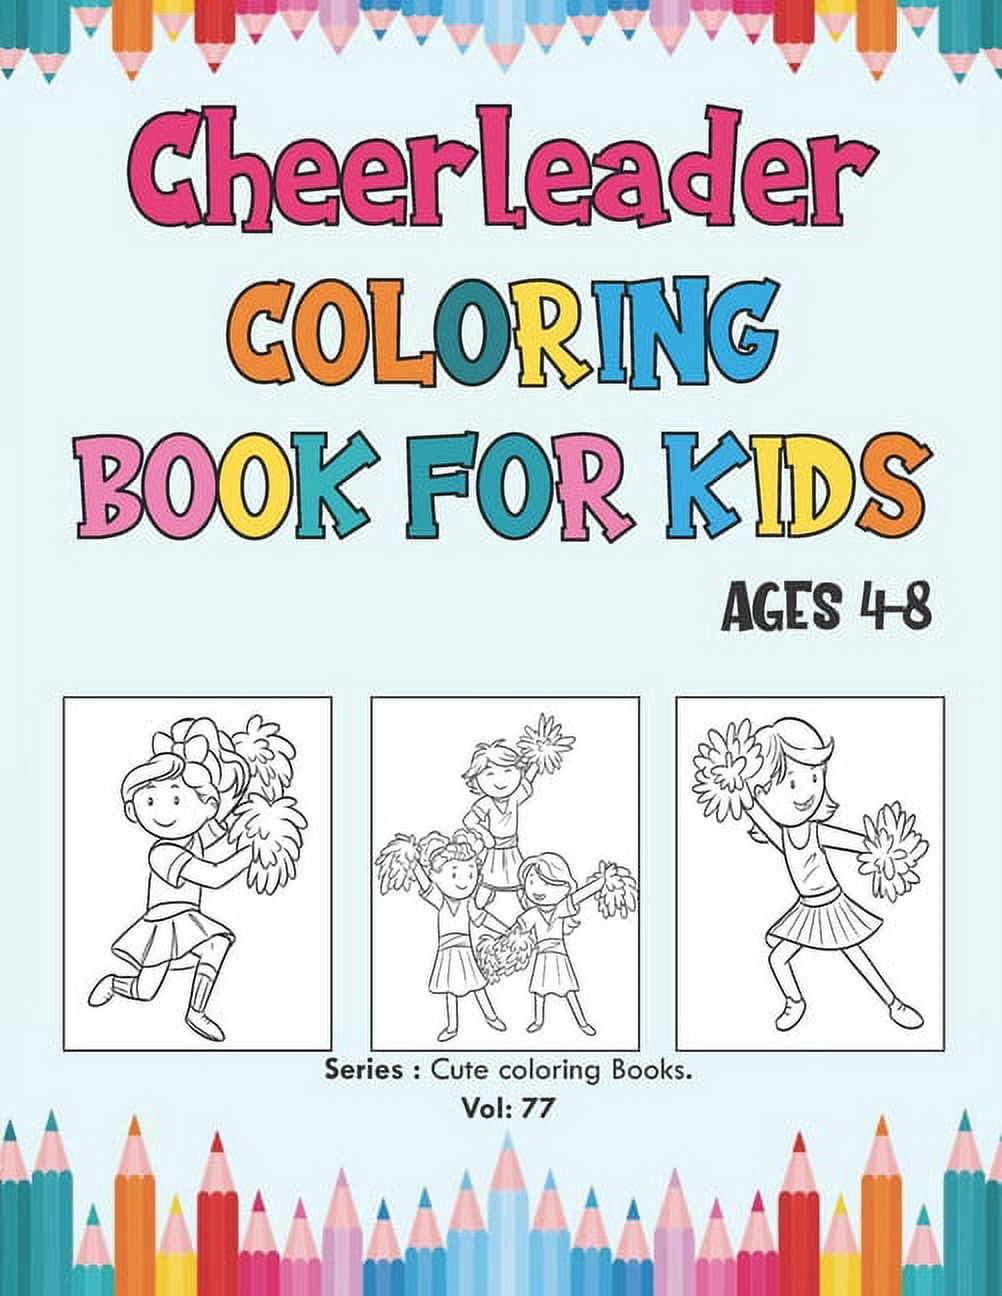 Cute coloring books cheerleader coloring book for kids ages